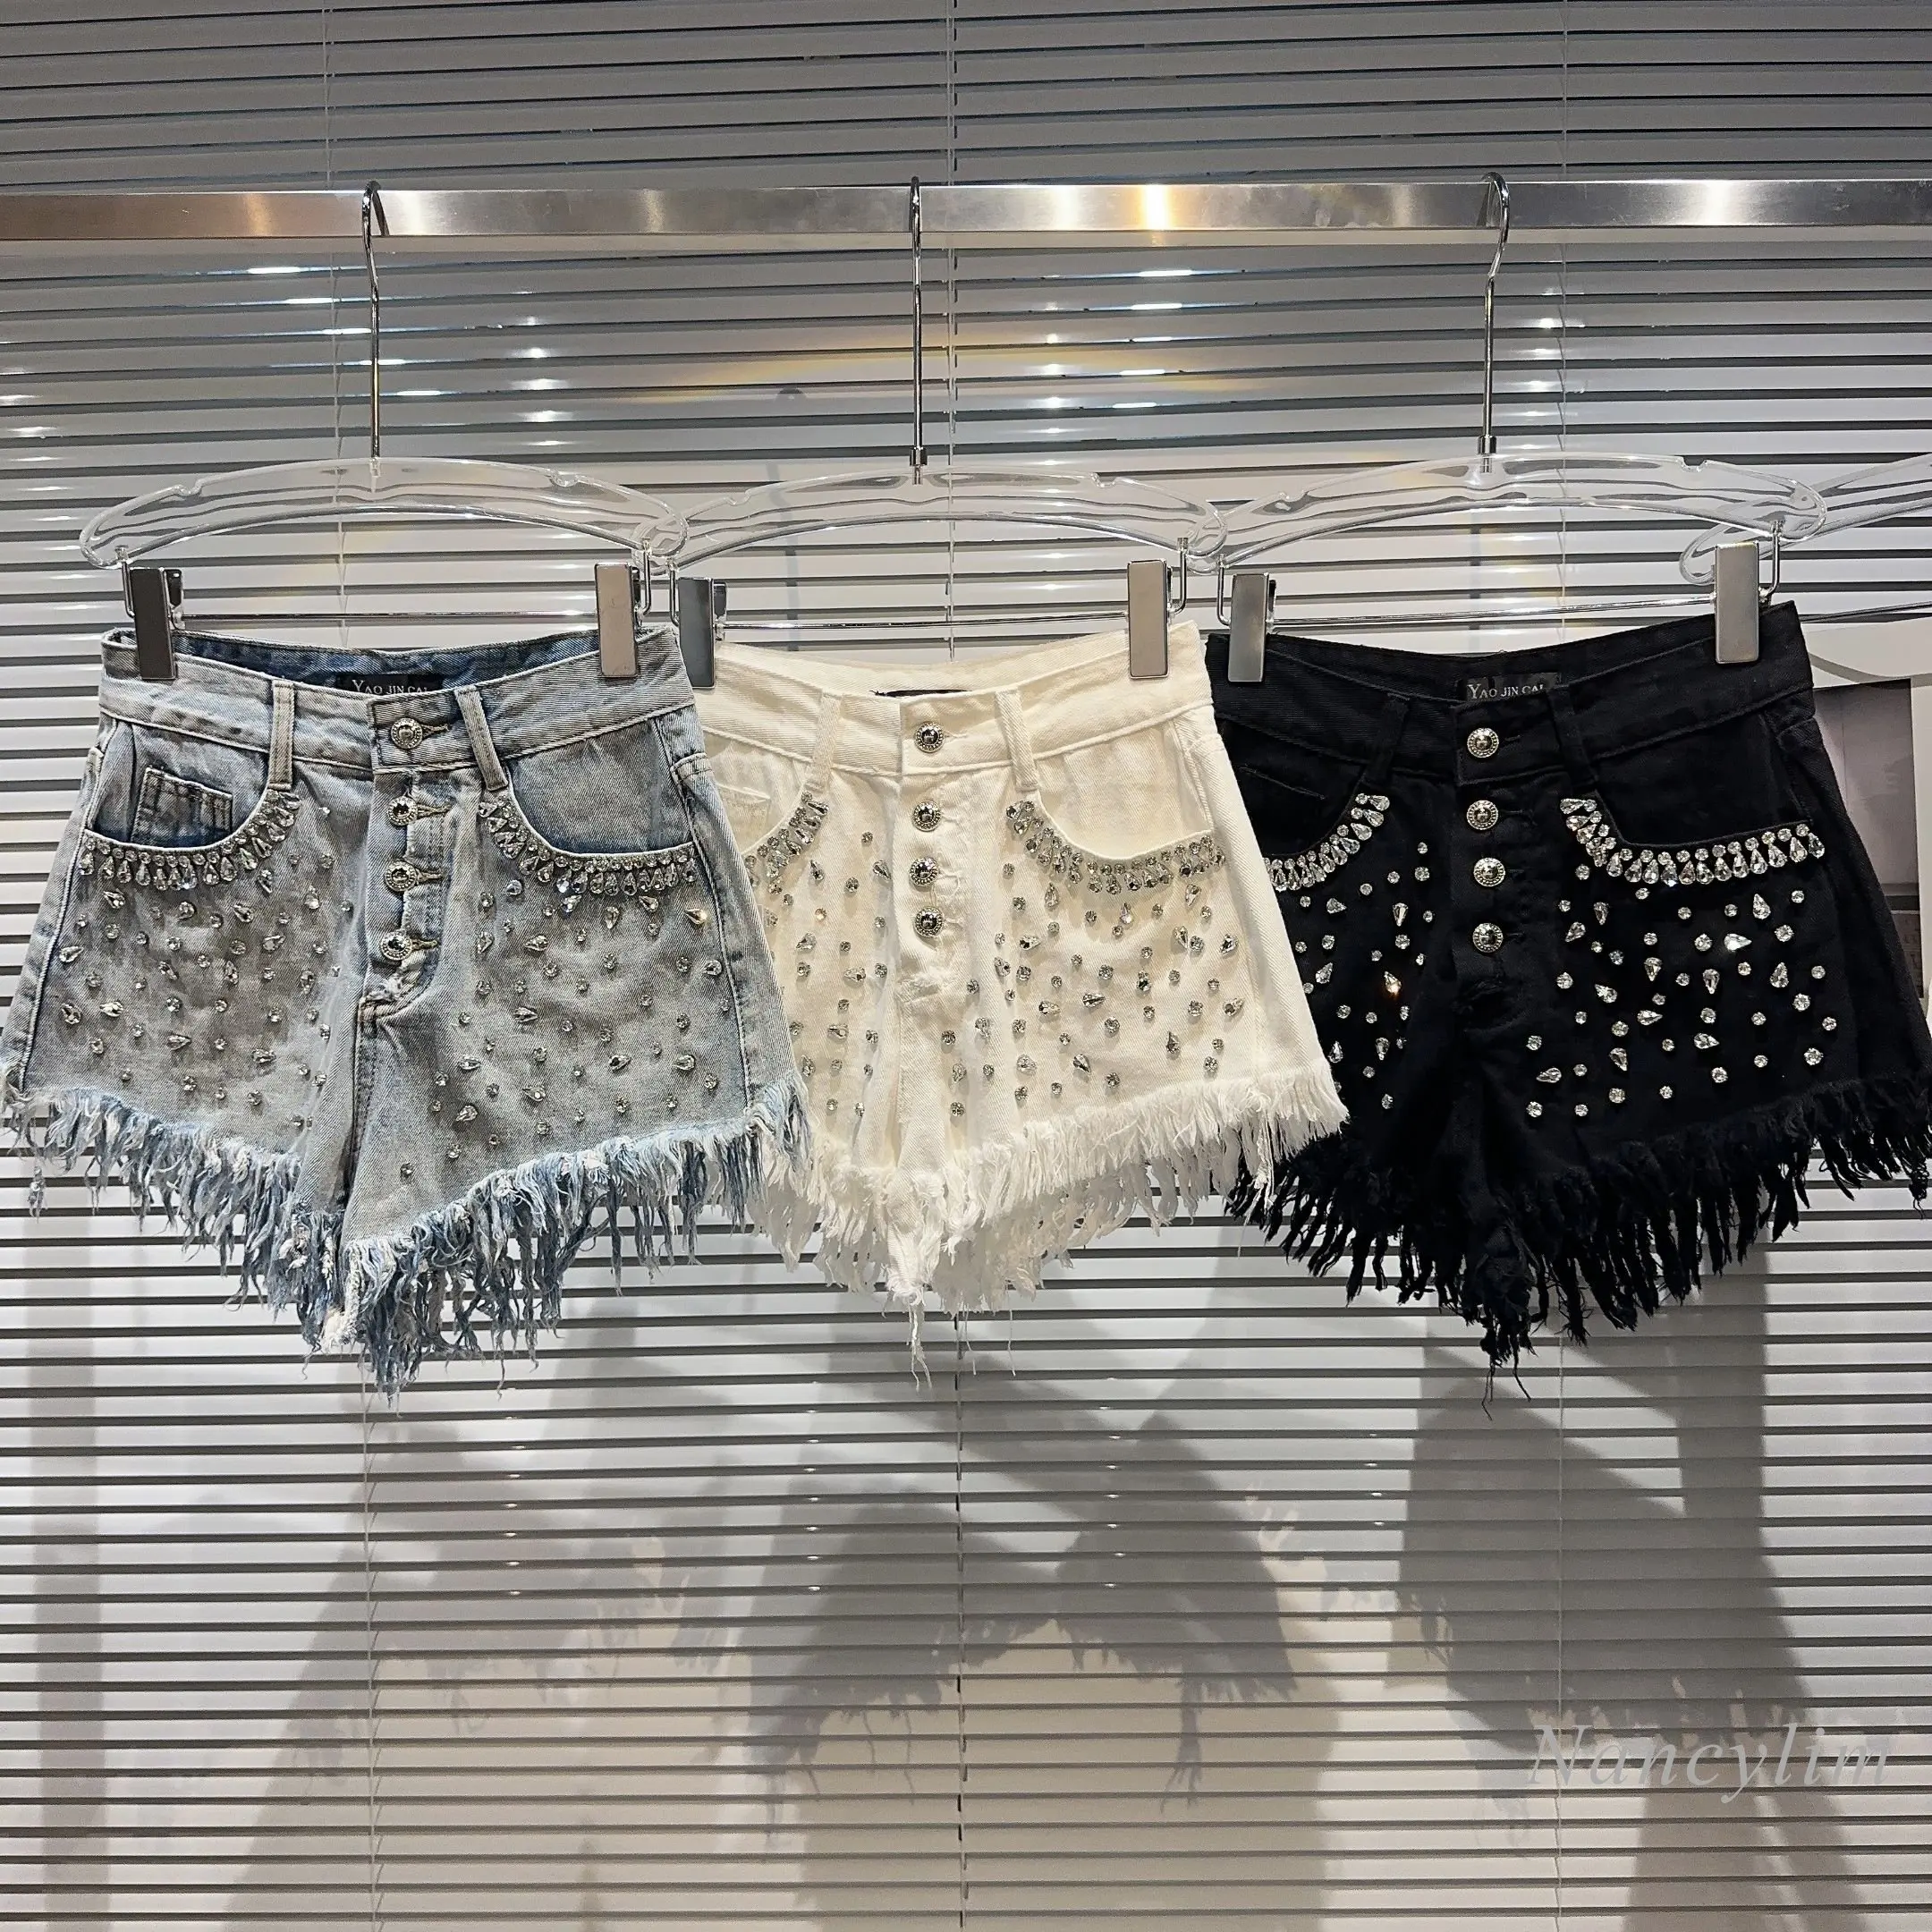 2023 Summer Large Particles Rhinestone Beaded Tassel Edge Three-Point Denim Shorts Women New Style Fried Street Cool Hot Pants y2k fashion high waisted jeans shorts for women s summer blue raw edge korean style straight baggy street vintage denim shorts